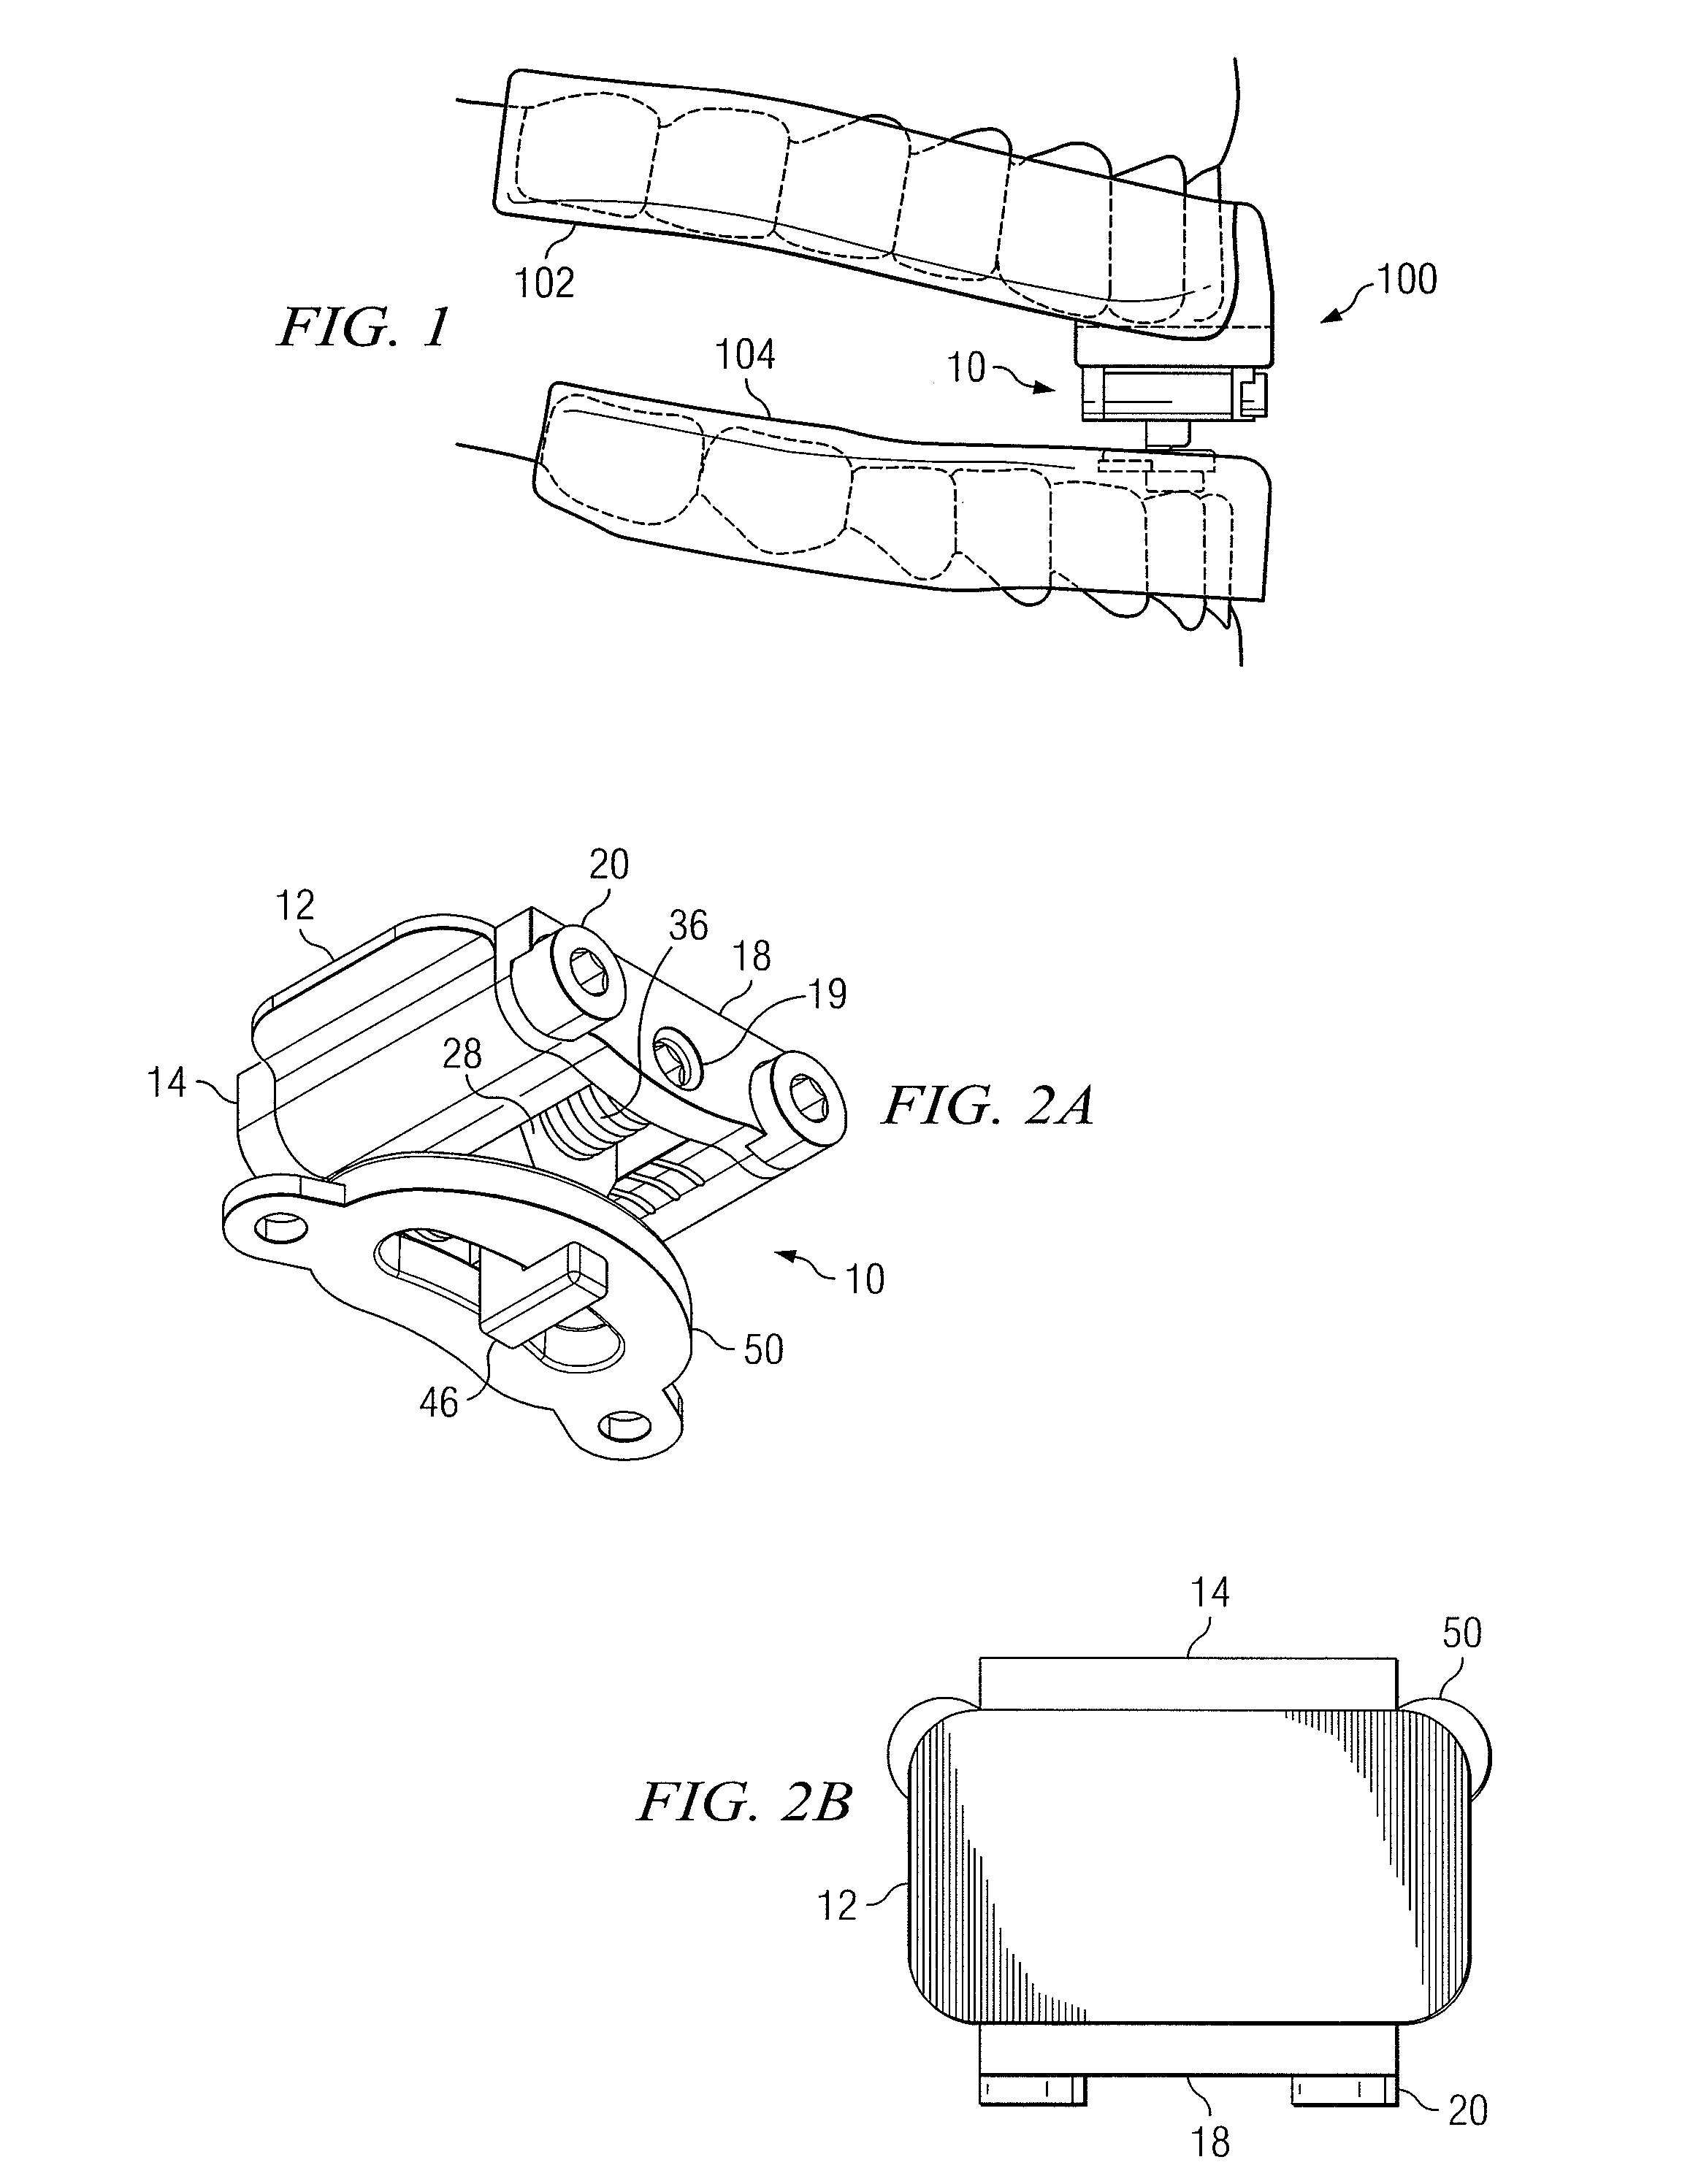 System for Coupling an Oral Appliance to a Medical Mask